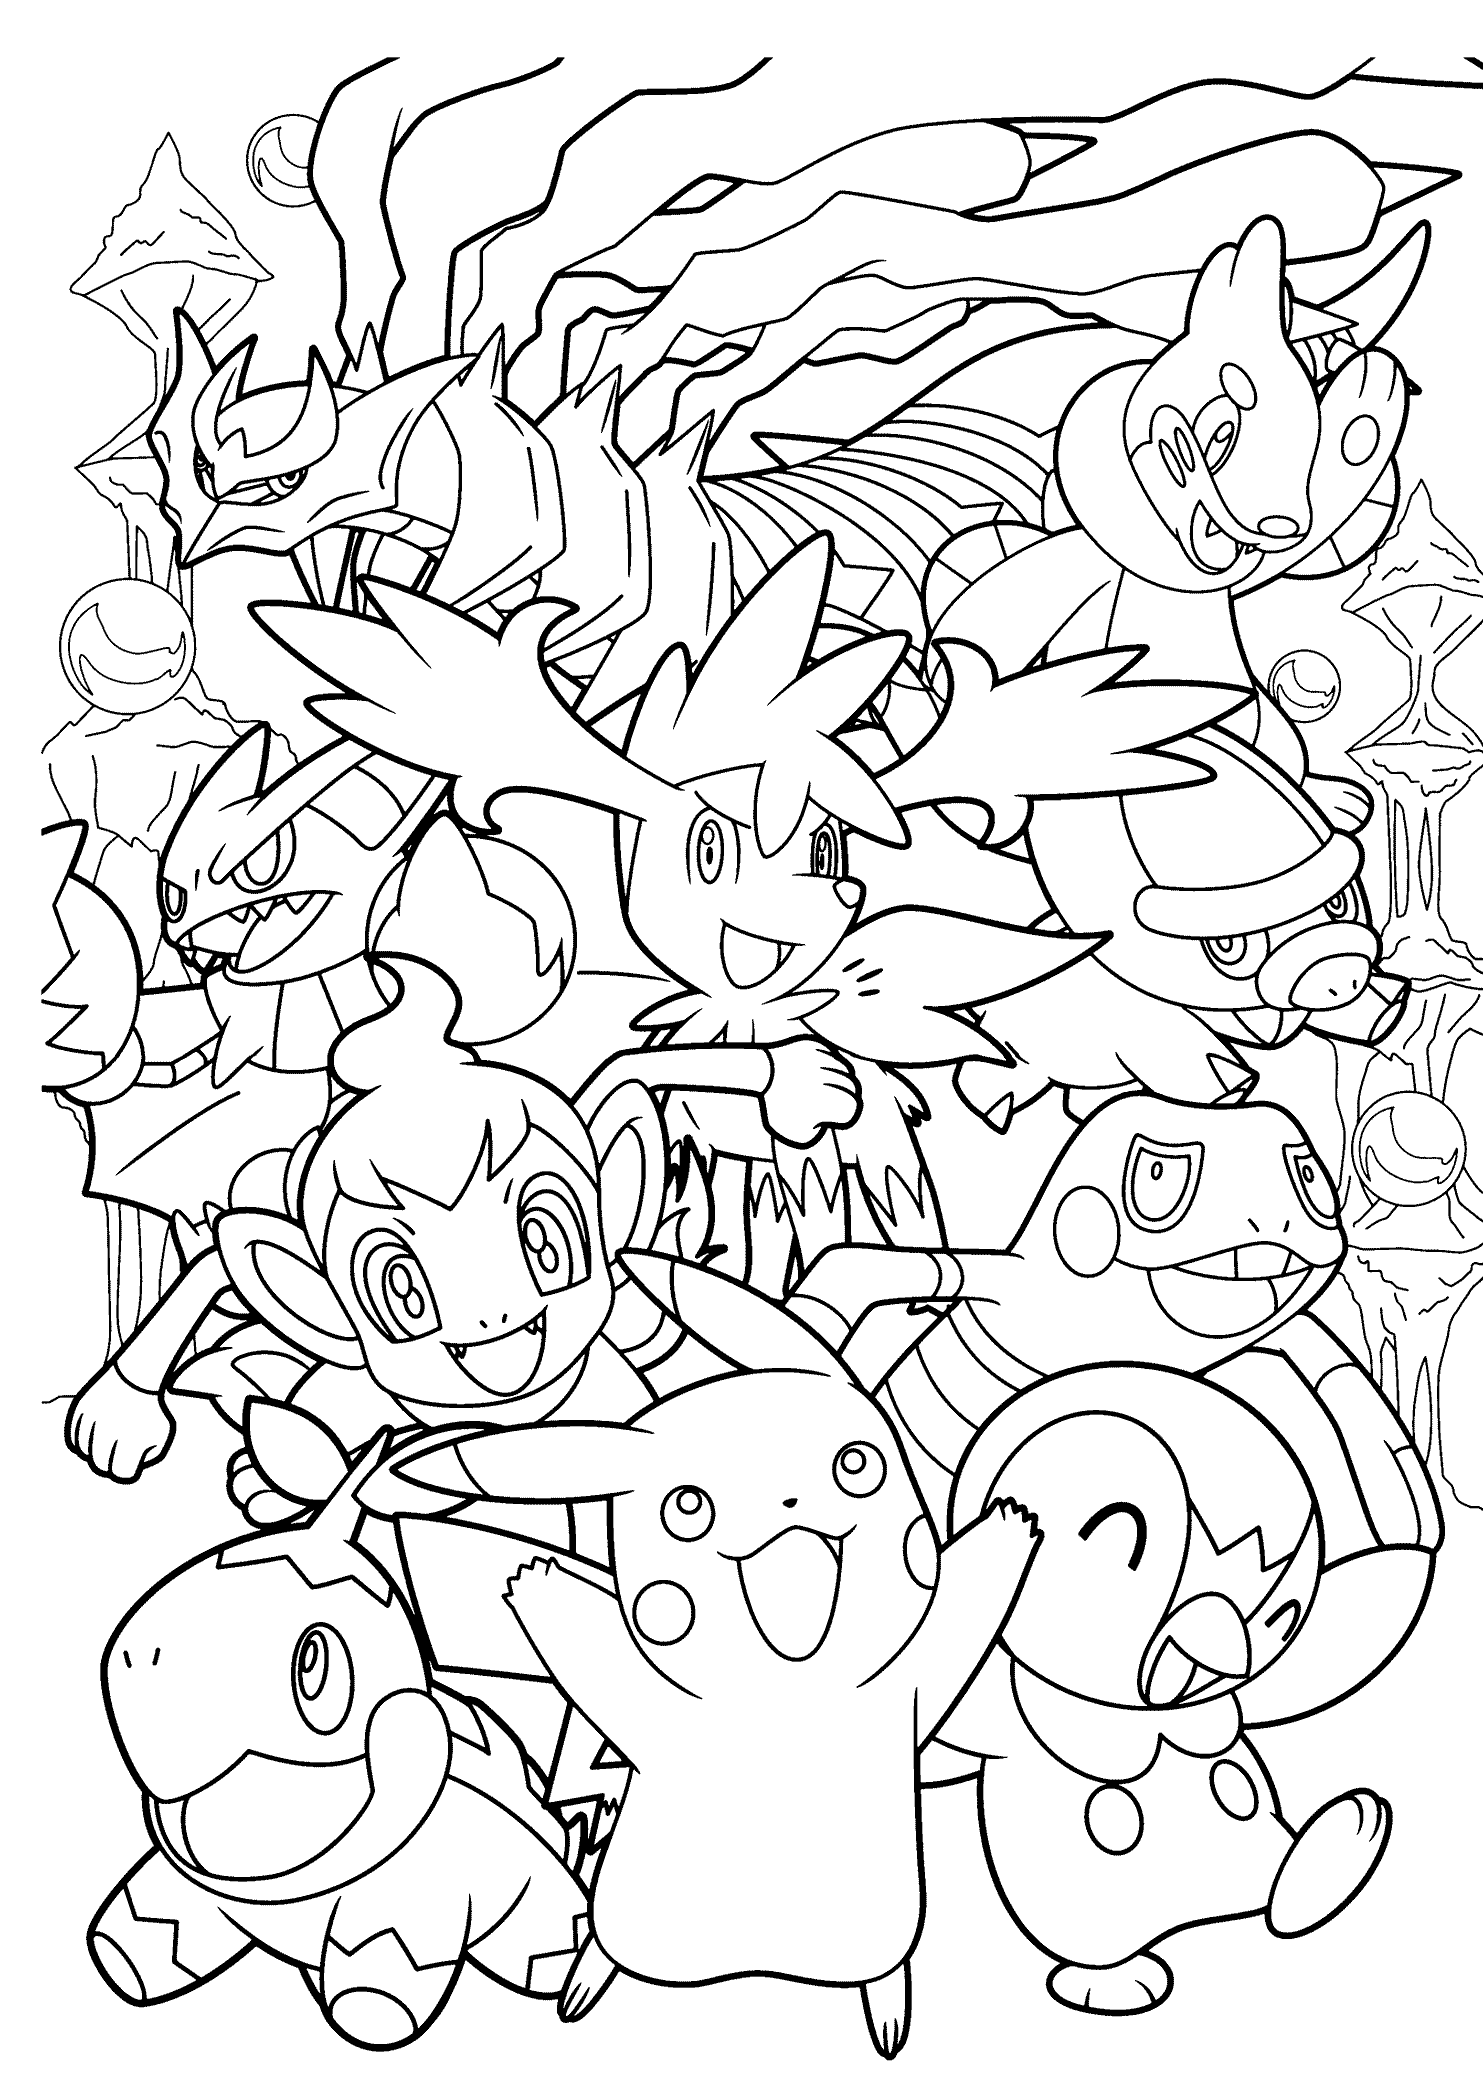 Pokemon Coloring Pages Games Online - Coloring